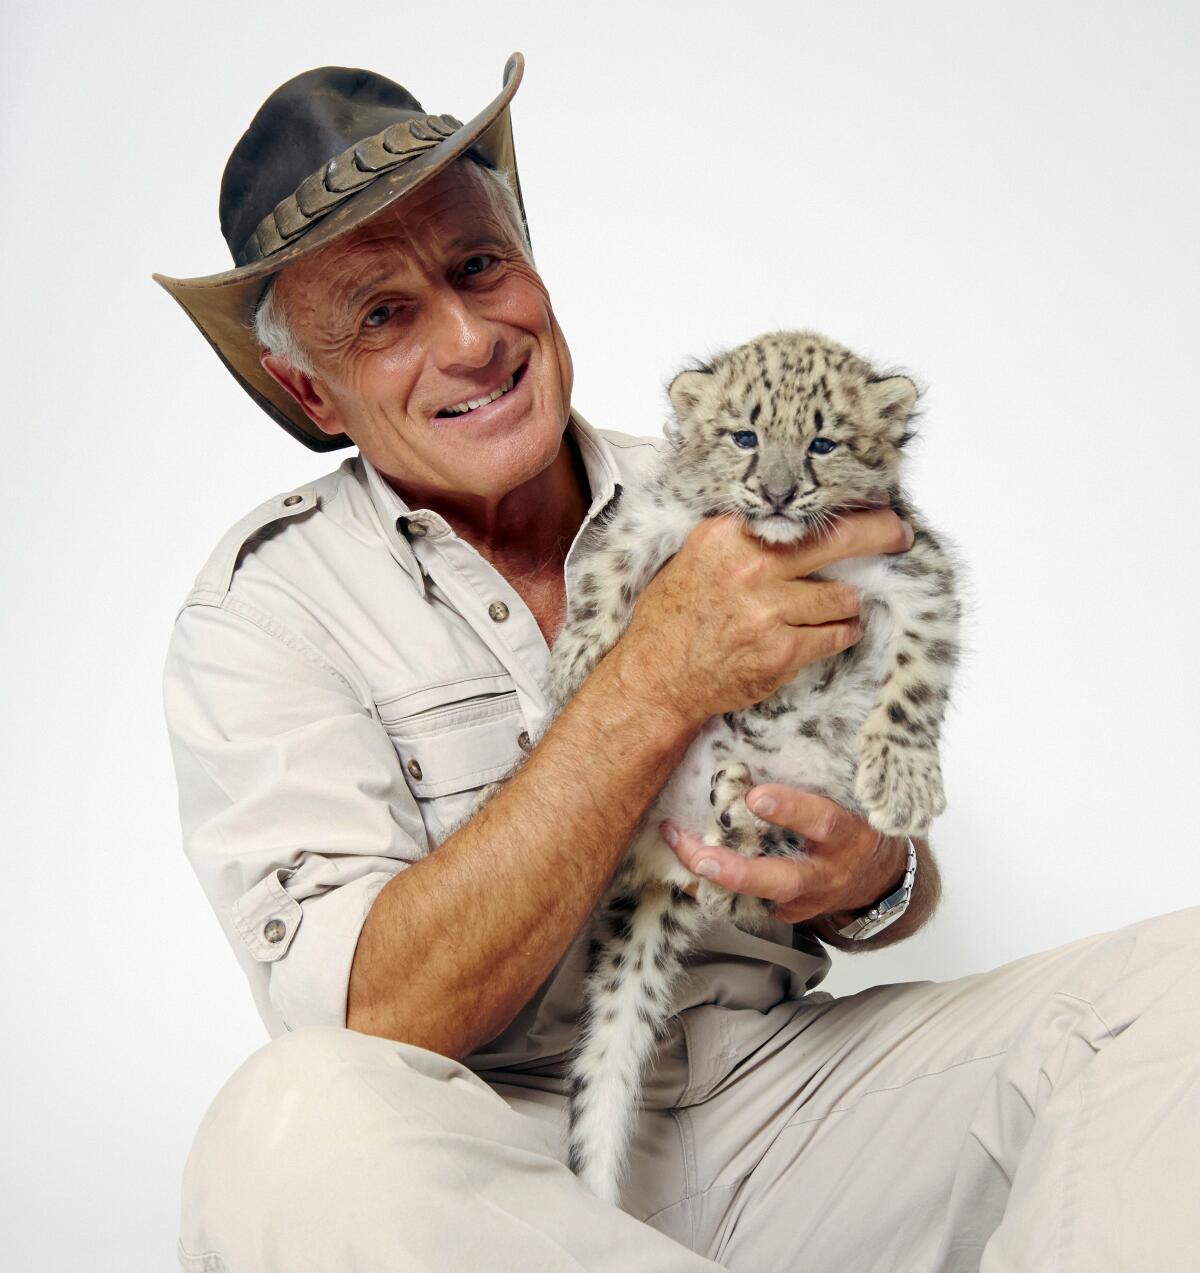 Jack Hanna wears a wide-brimmed hat and holds a snow leopard cub